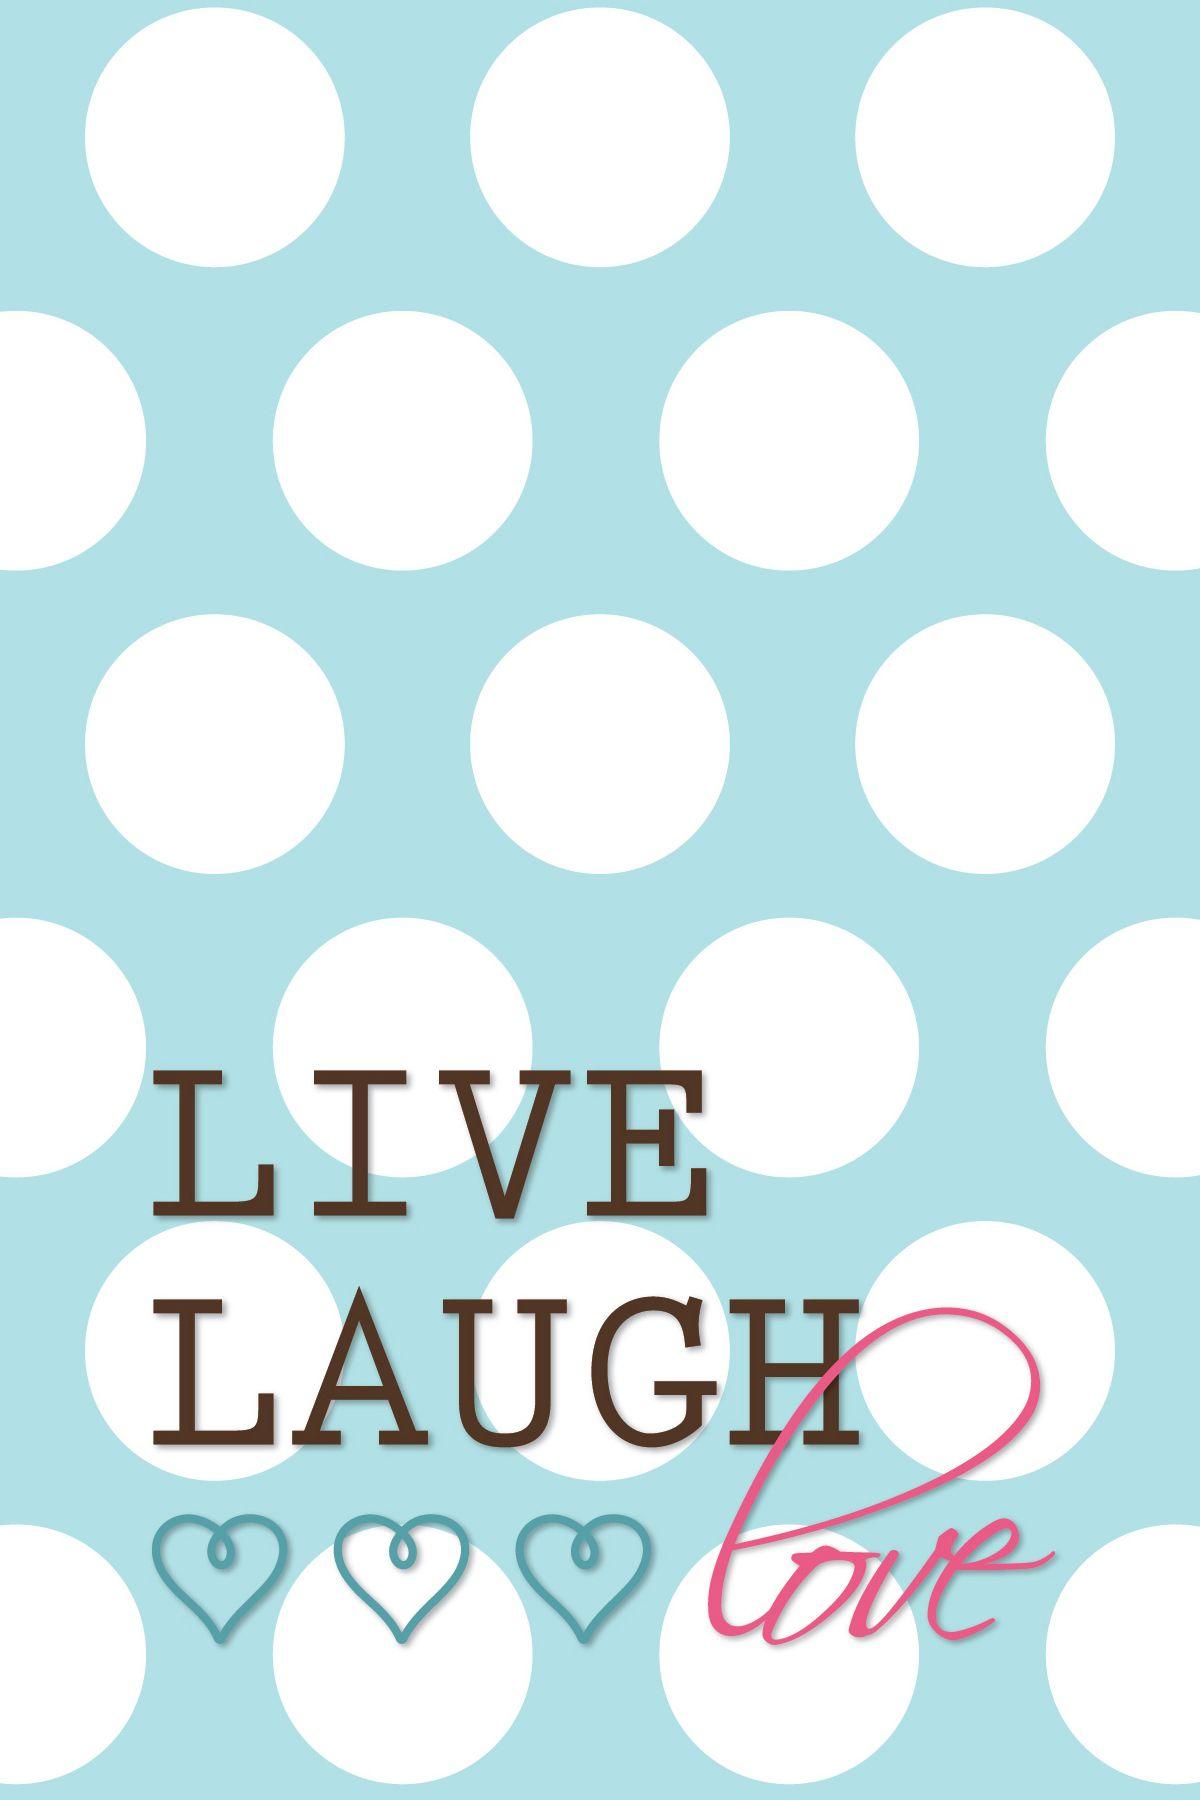 Live Laugh Love FREE Printable. Printed this for a framed pic at